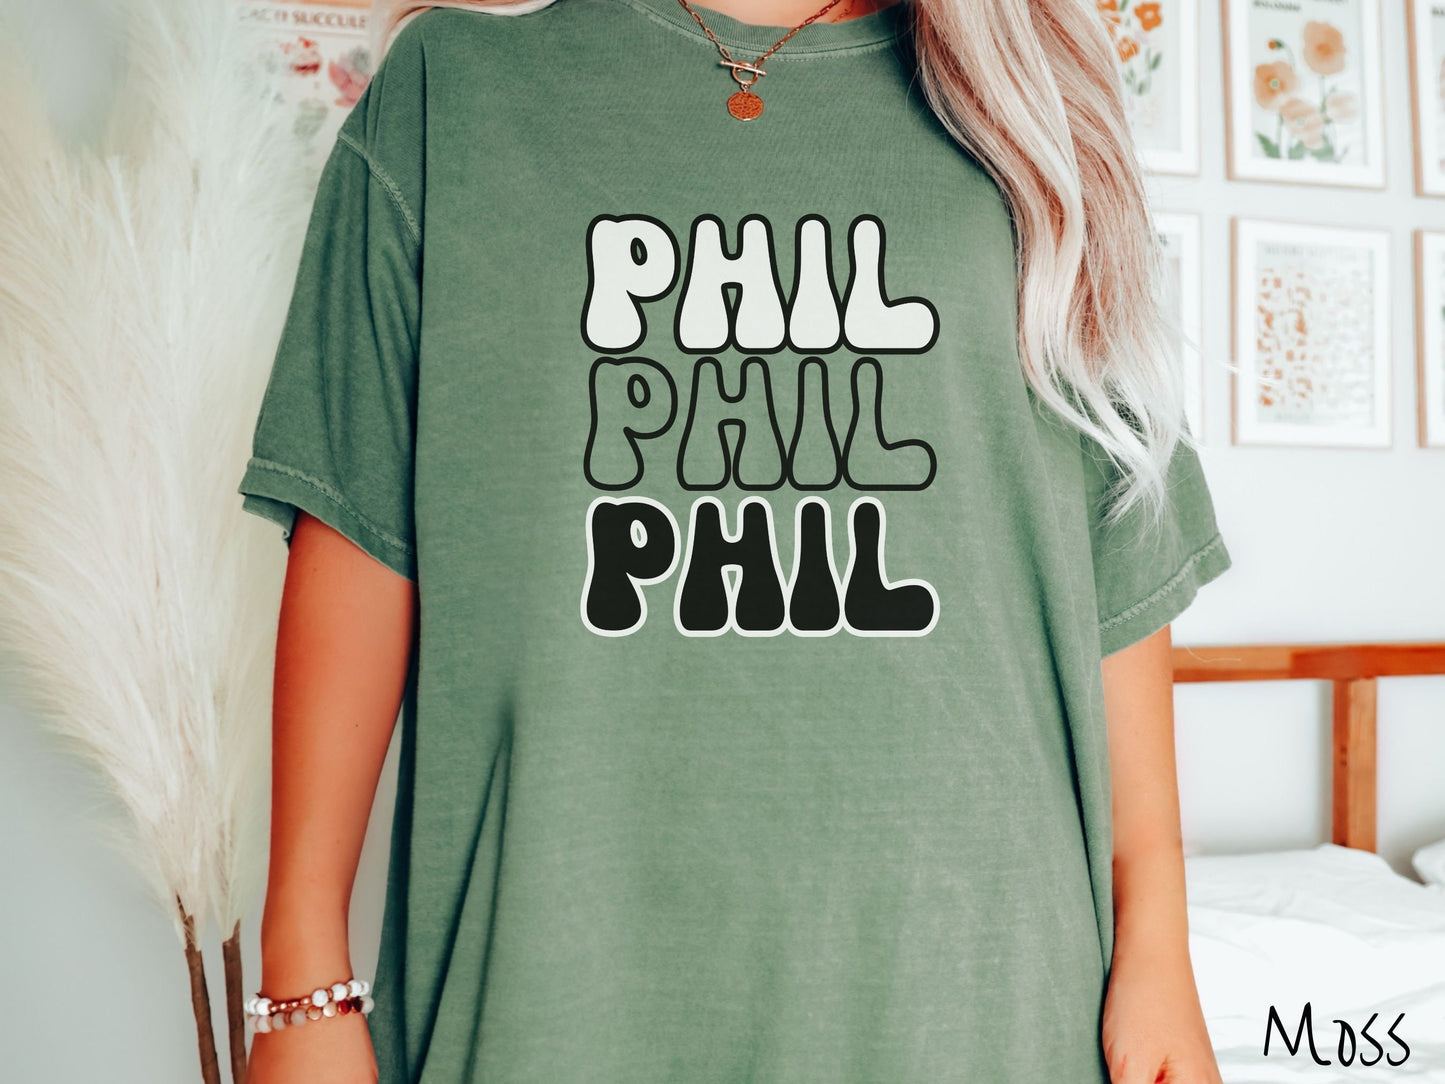 A woman wearing a cute moss colored shirt with the text PHIL listed three times vertically in white, red, and black color text. The shirt is referring to the chant that occurs for the groundhog Phil every Groundhogs Day in Punxsutawney, PA.